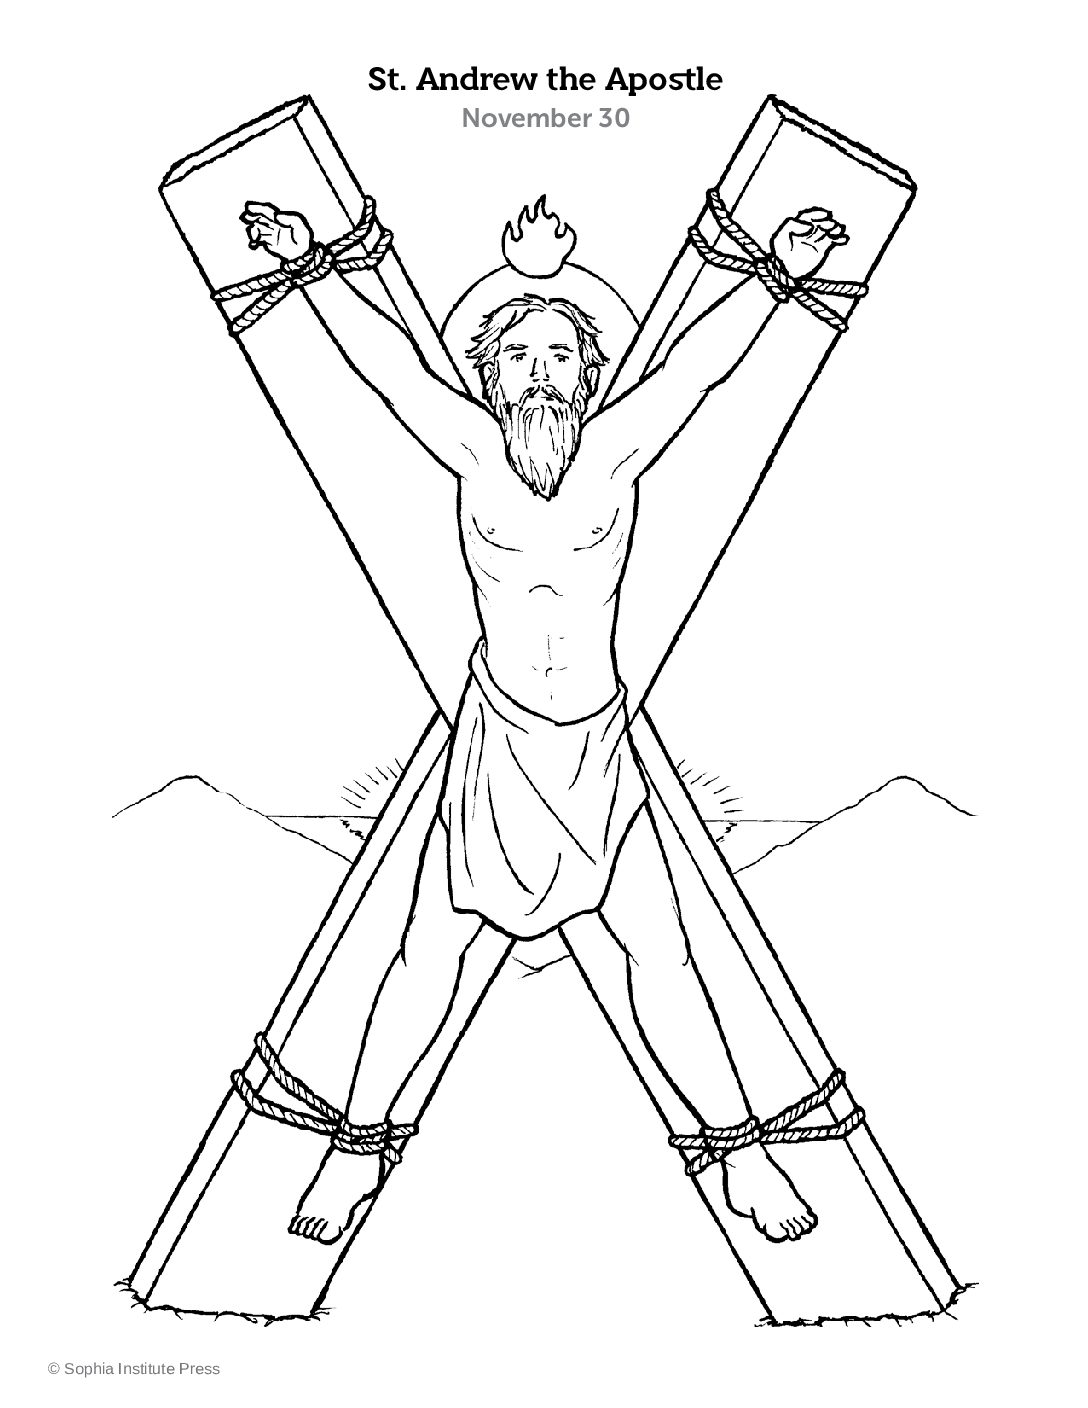 St andrew apostle story and coloring page